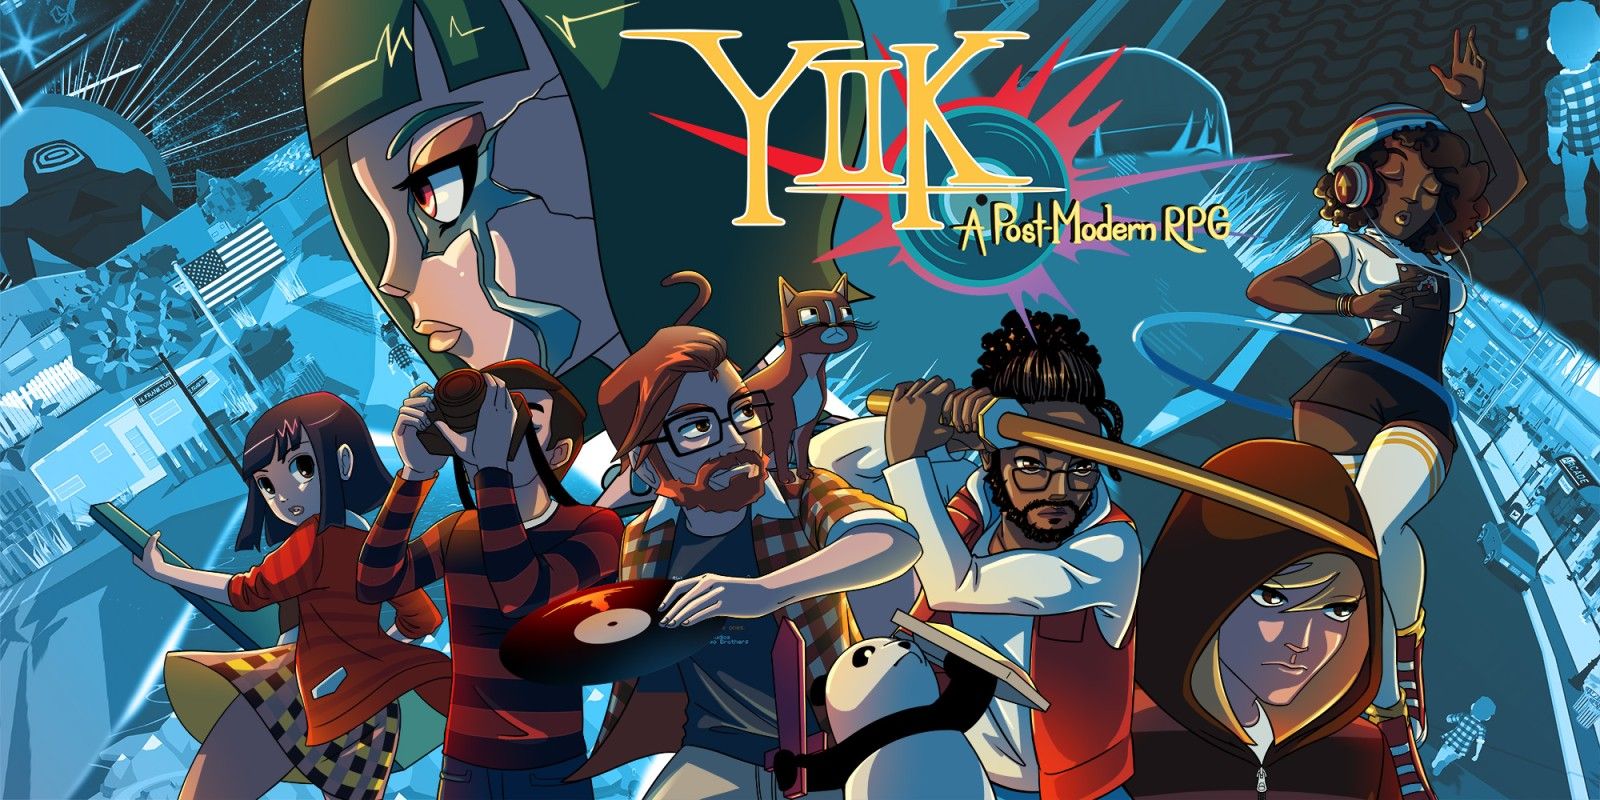 YIIK - A Postmodern RPG promotional art with the main cast.